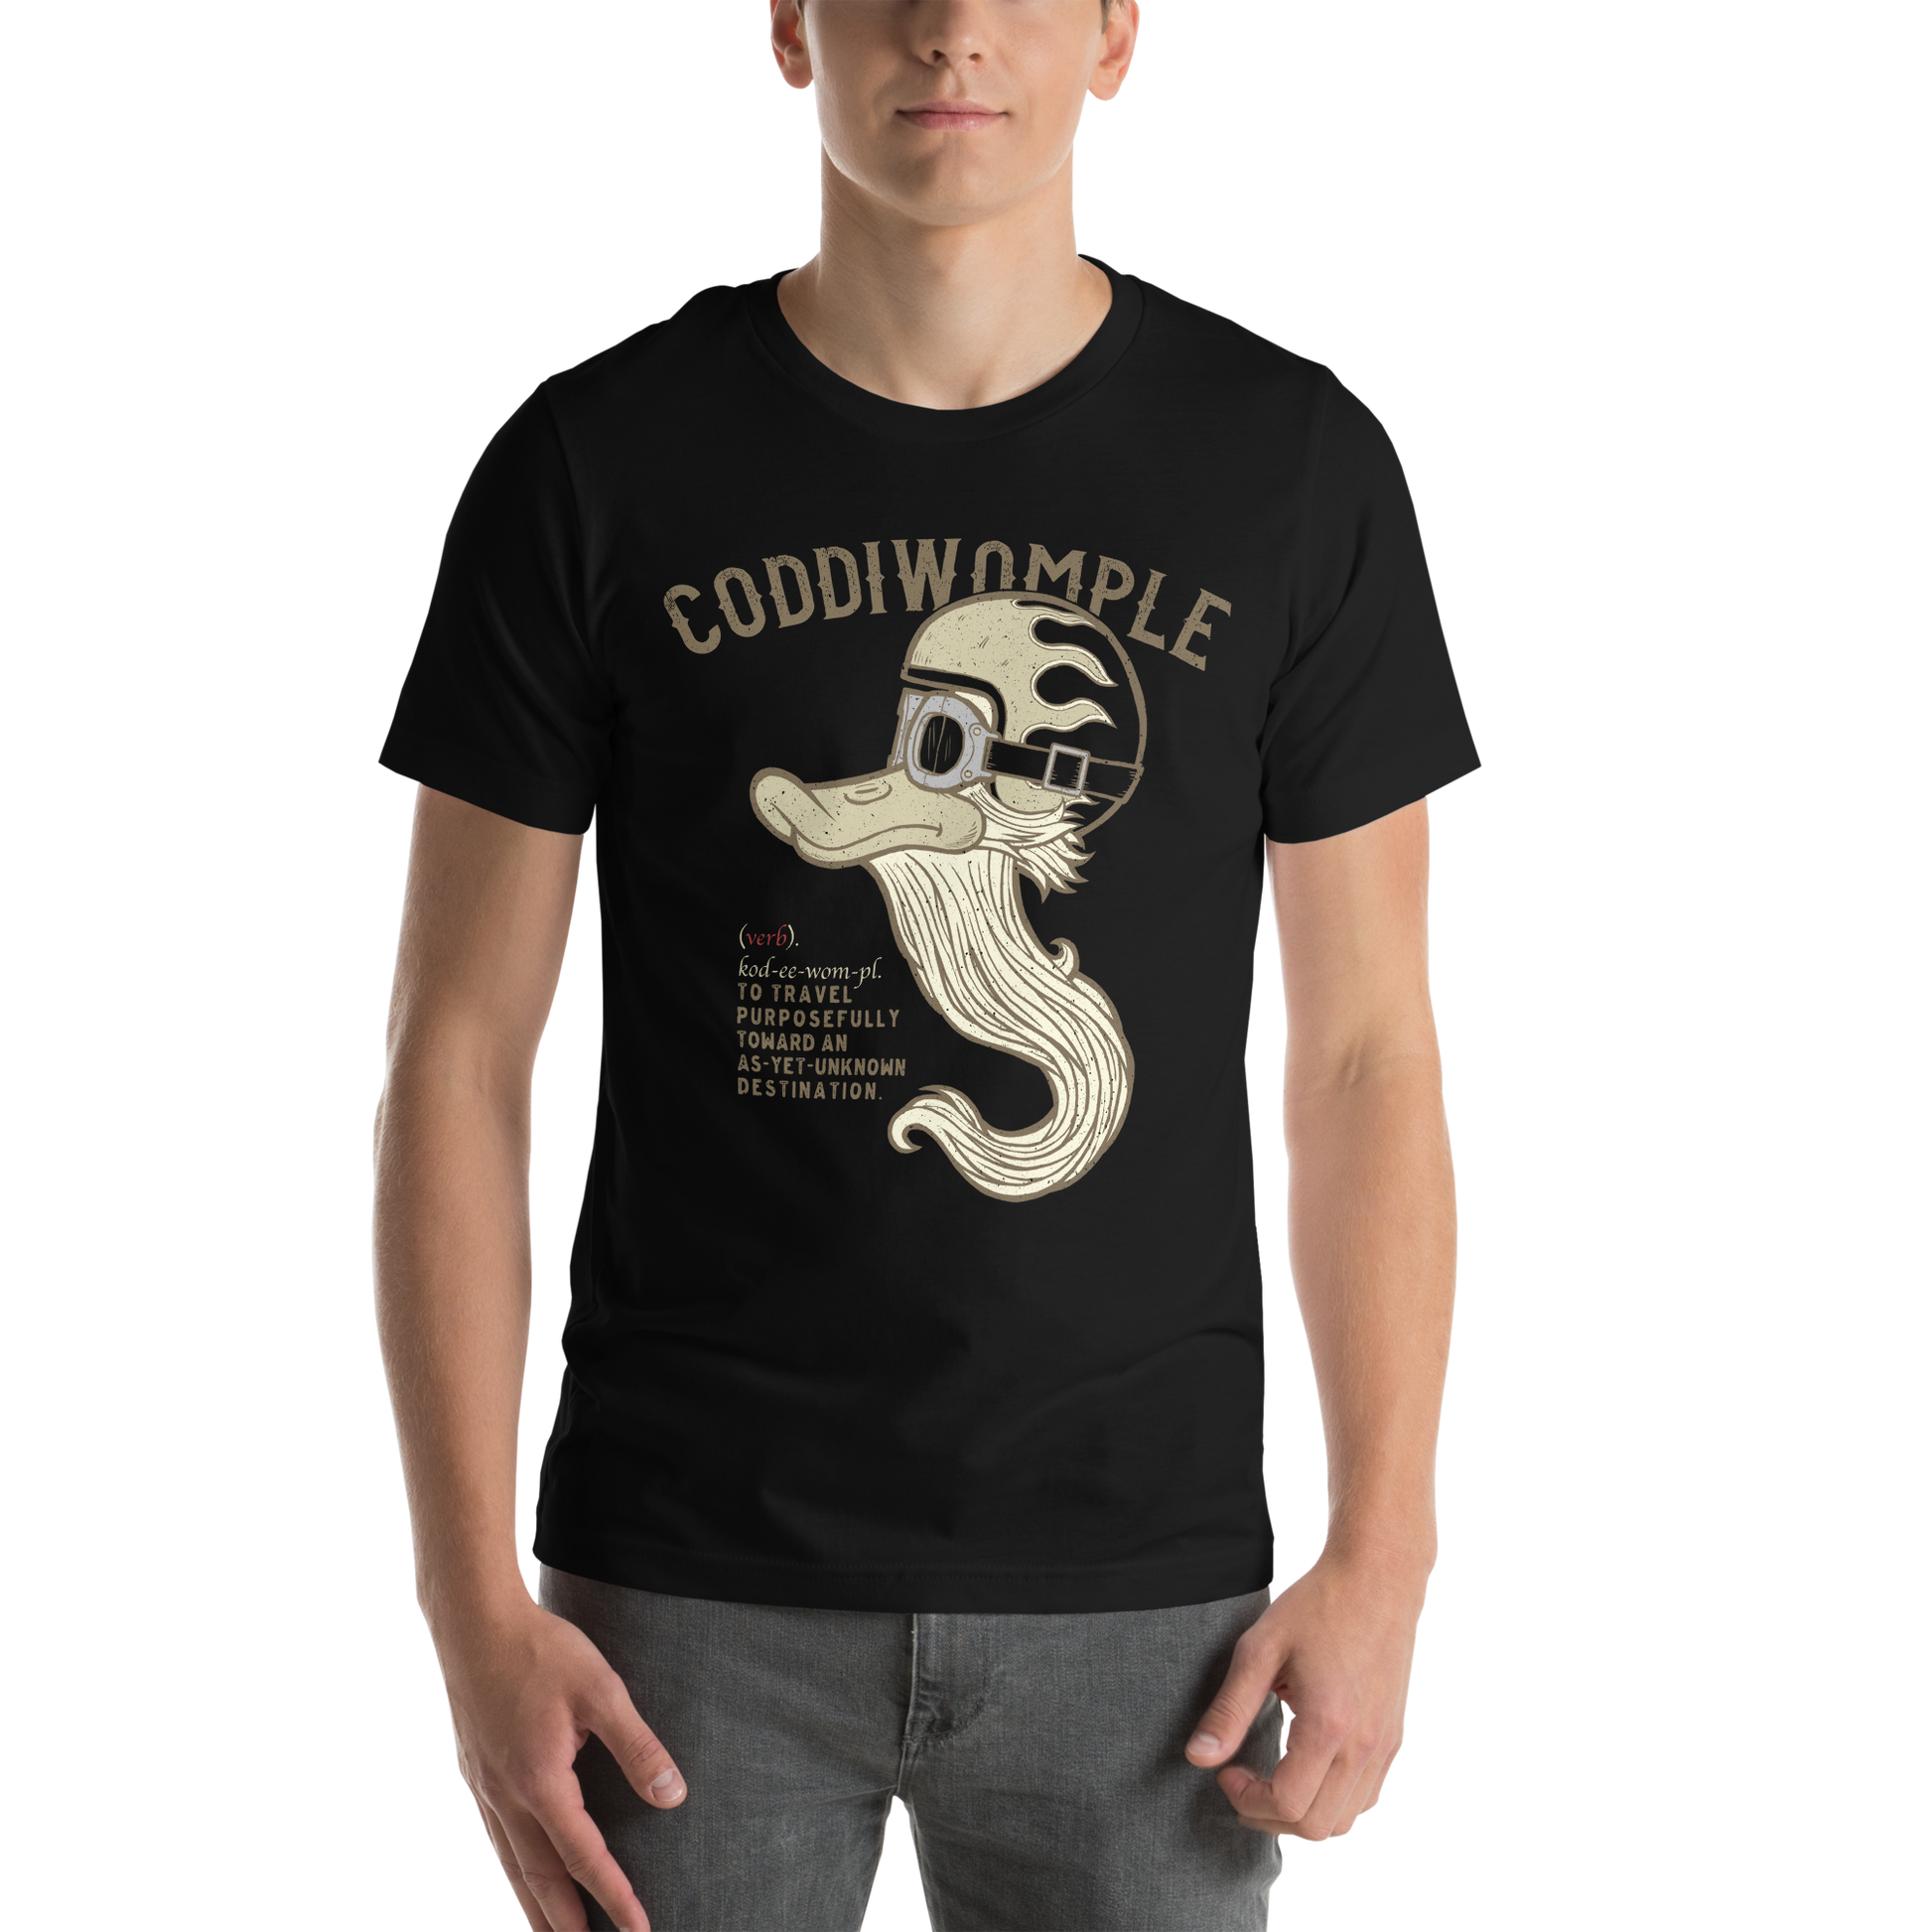 Coddiwomple journey T-shirt for motorcyclists who just go